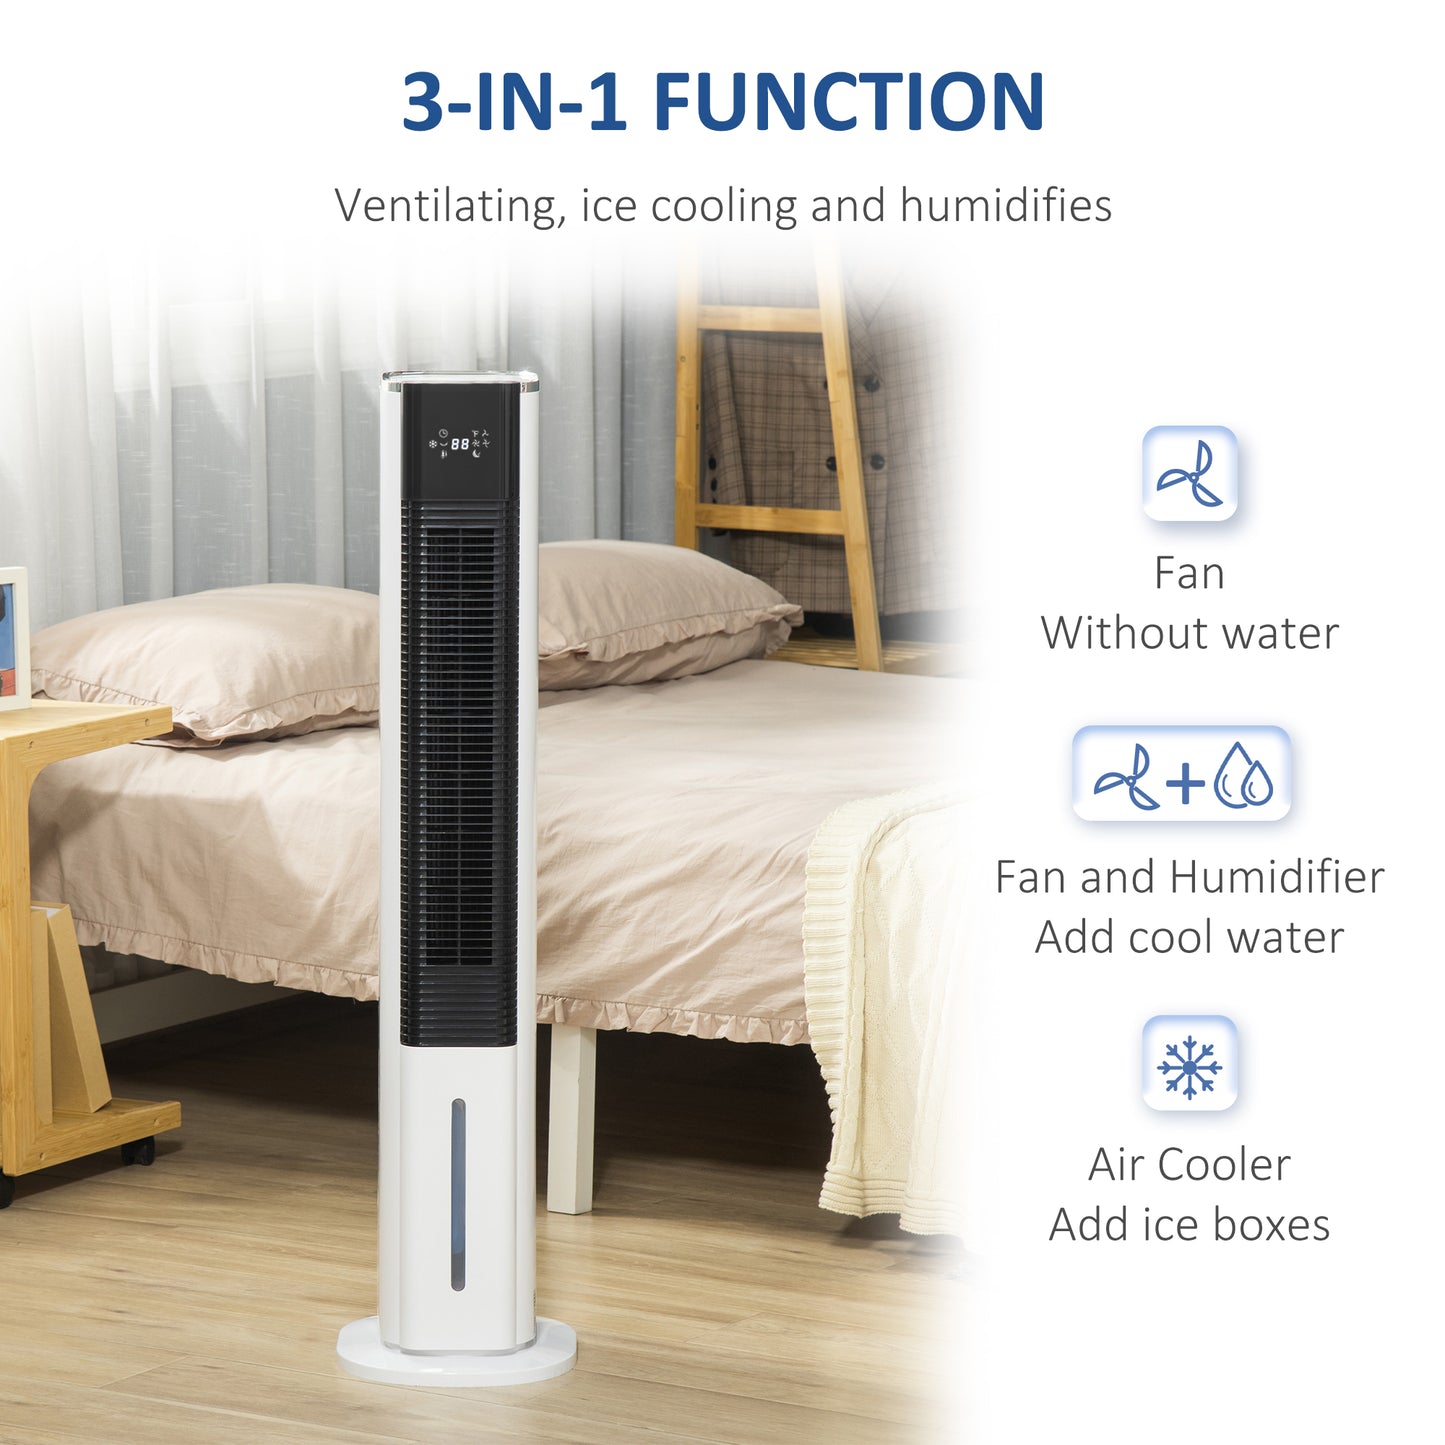 HOMCOM Portable Air Cooler 42", Evaporative Ice Cooling Fan, Humidifier, Water Conditioner with 3 Modes, Remote Control, Timer, Bedroom, White